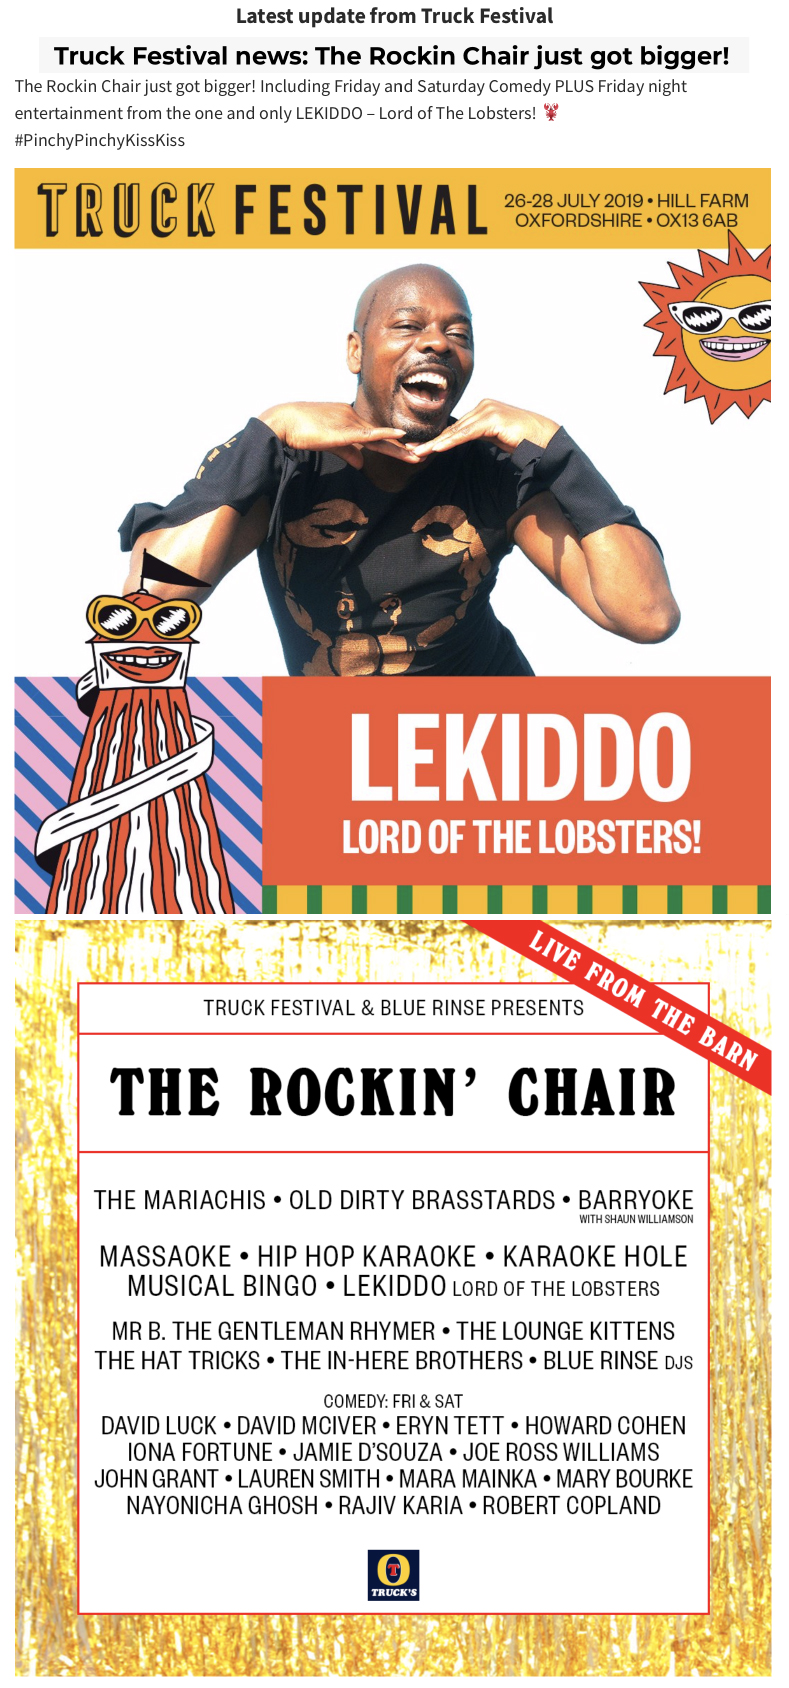 TRUCK 2019
Truck Festival news: The Rockin Chair just got bigger!

Latest update from Truck Festival
The Rockin Chair just got bigger! Including Friday and Saturday Comedy PLUS Friday night entertainment from the one and only LEKIDDO – Lord of The Lobsters! 
#PinchyPinchyKissKiss